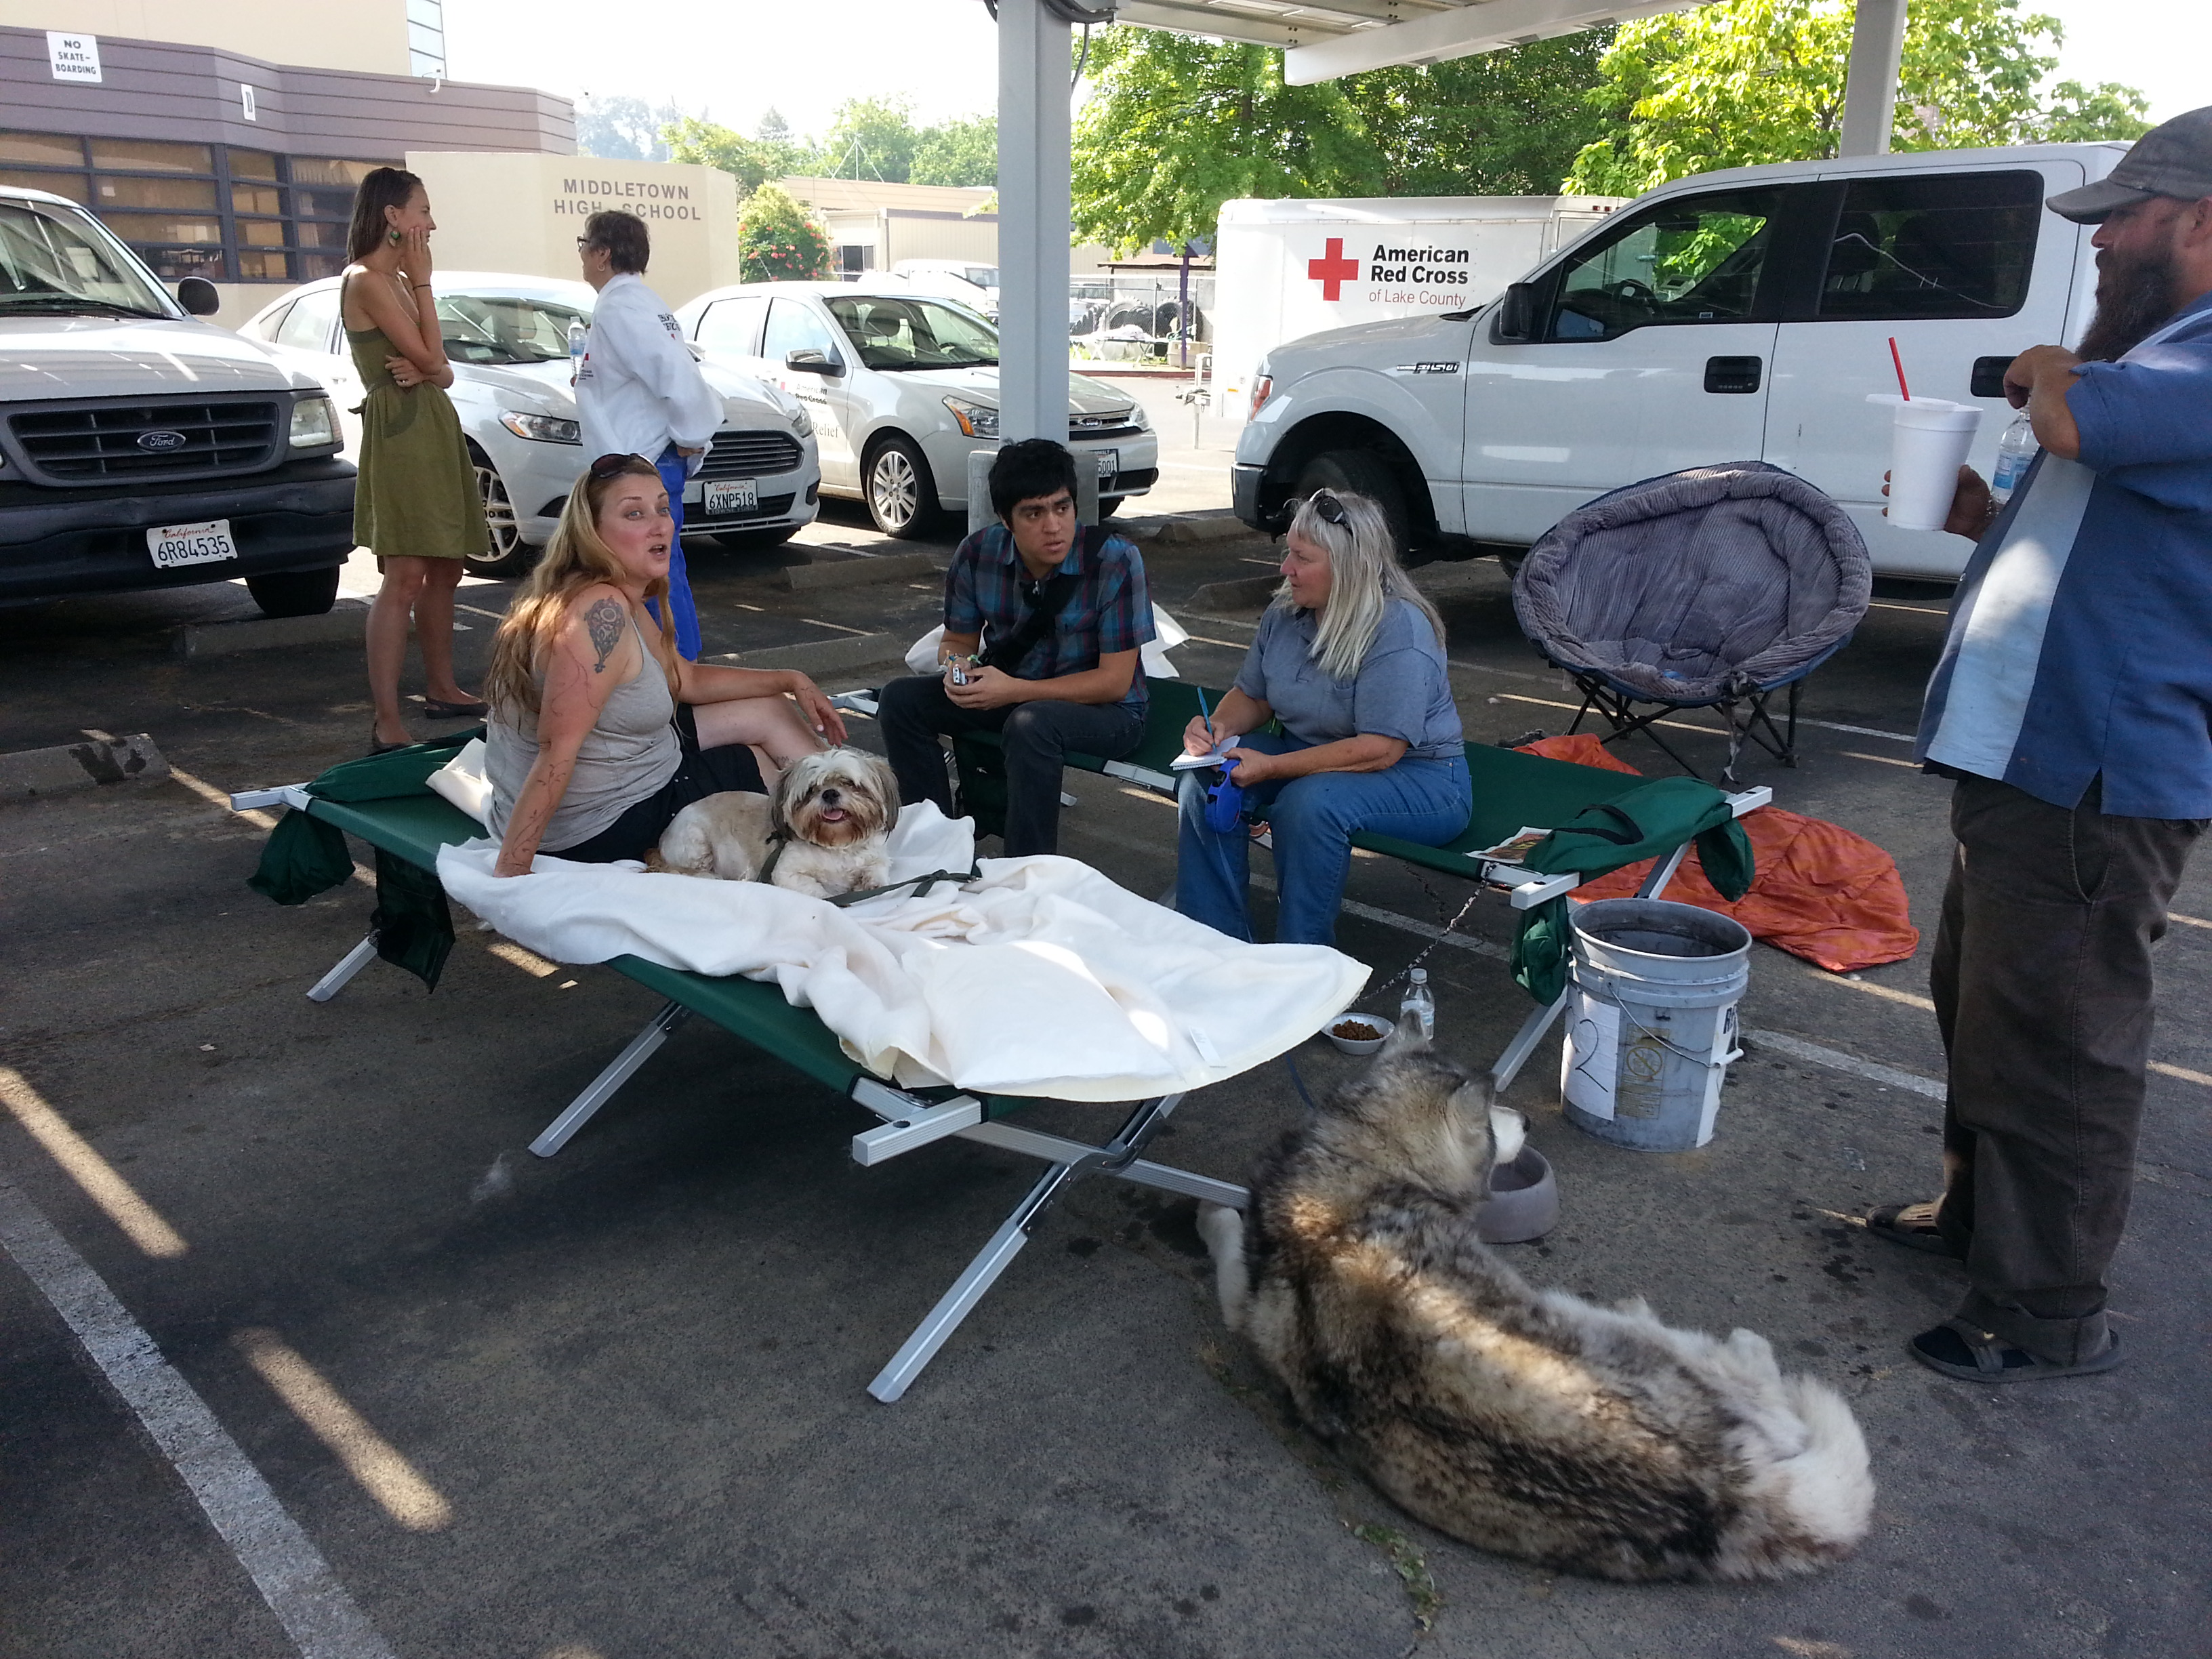 The Red Cross assists Napa County fire evacuees and their pets at Middletown High School Wednesday morning. (CBS SF)